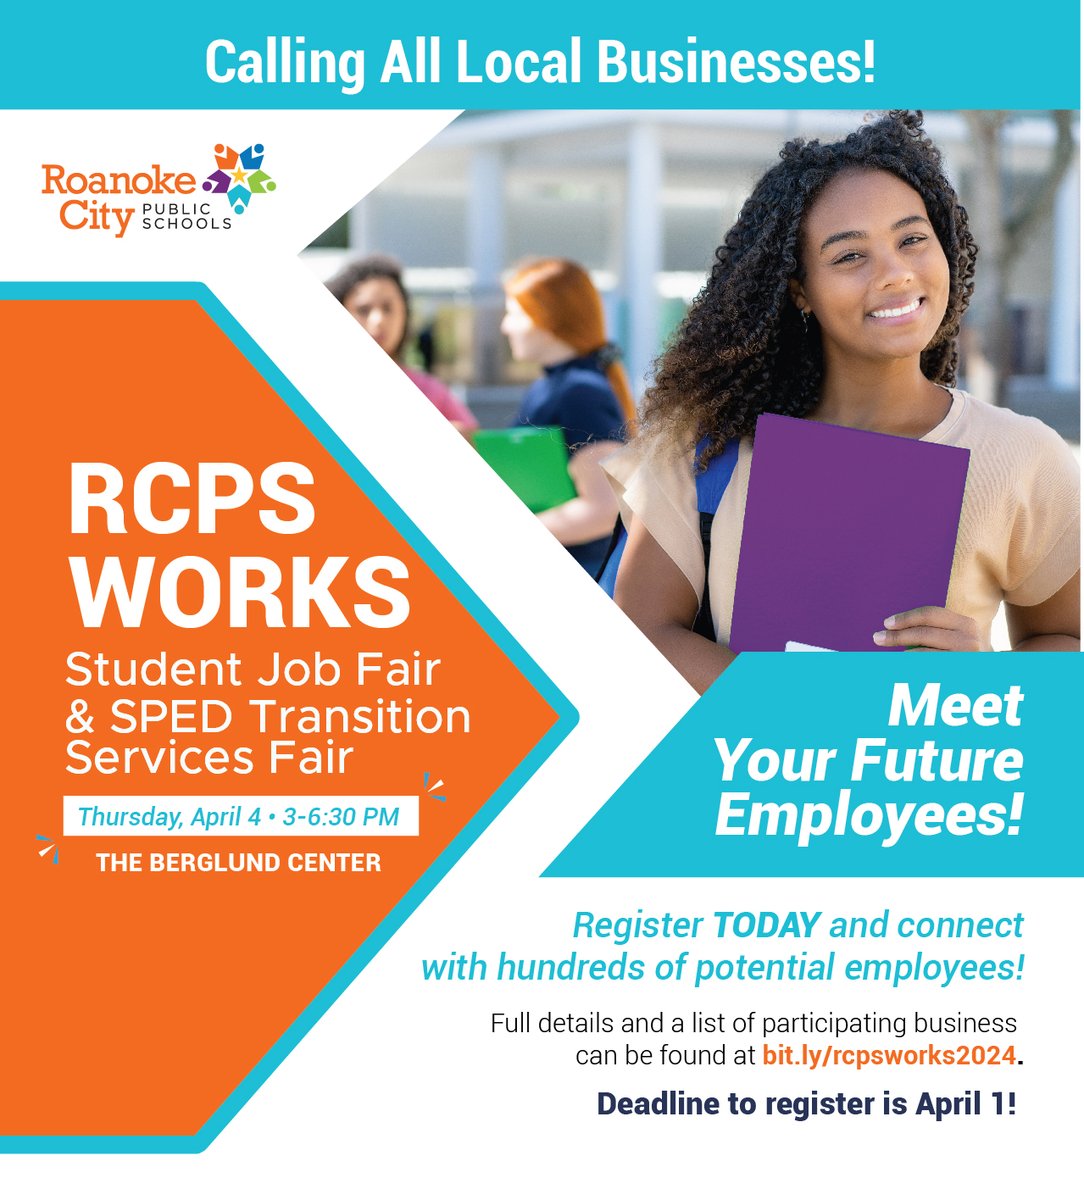 Today is the last day to register for RCPS Works Student Job Fair - April 4th from 3 - 6:30 p.m. Conduct on-site interviews & hire hardworking students for summer and beyond. Register now and connect with hundreds of potential employees! bit.ly/rcpsworks2024